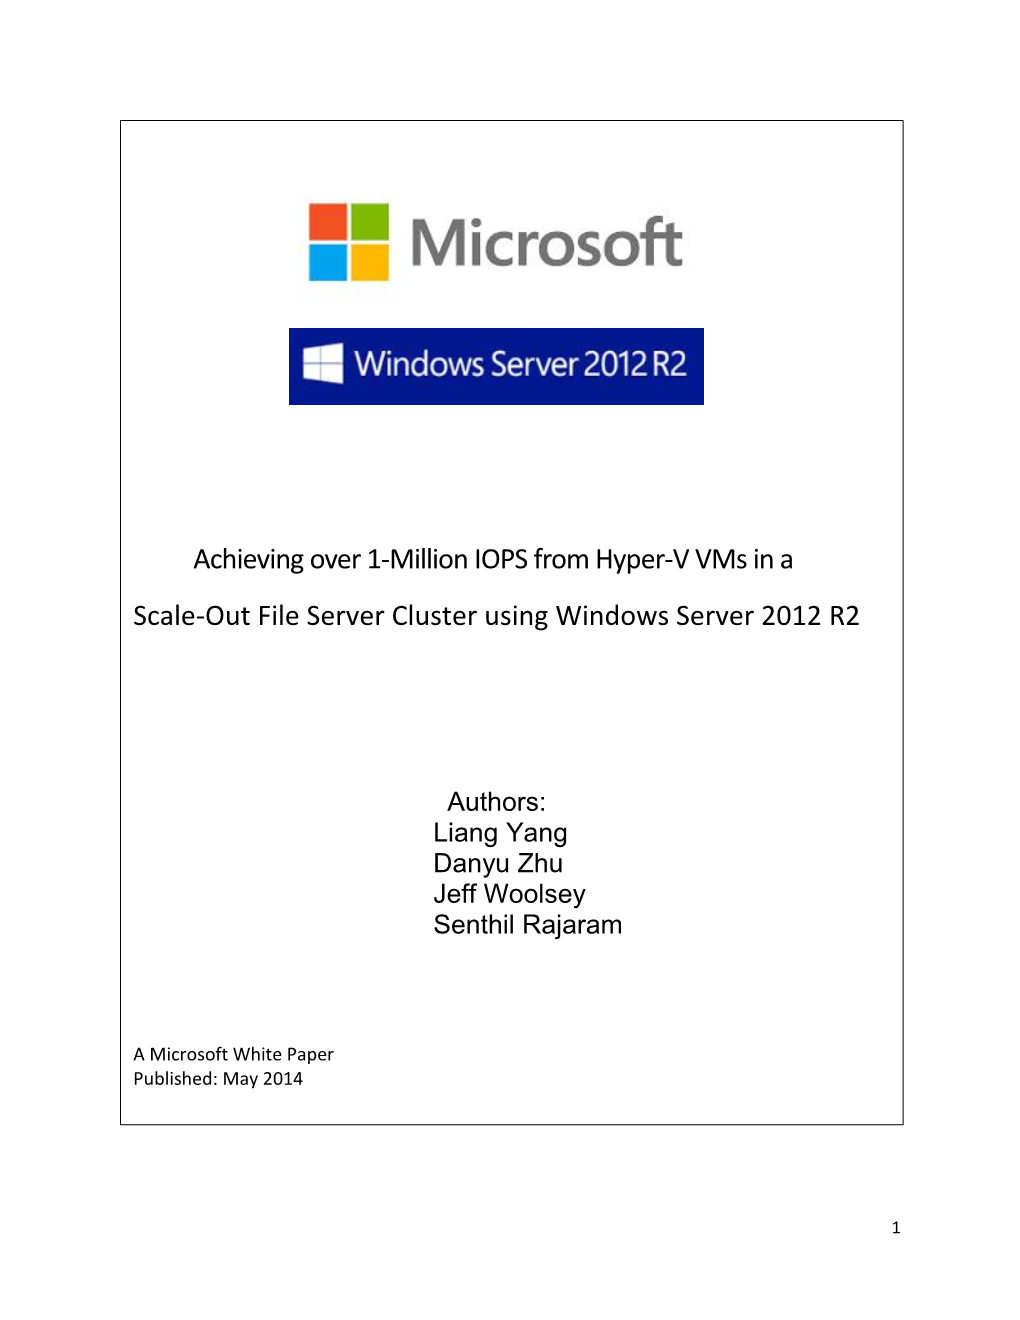 Achieving Over 1-Million IOPS from Hyper-V Vms in a Scale-Out File